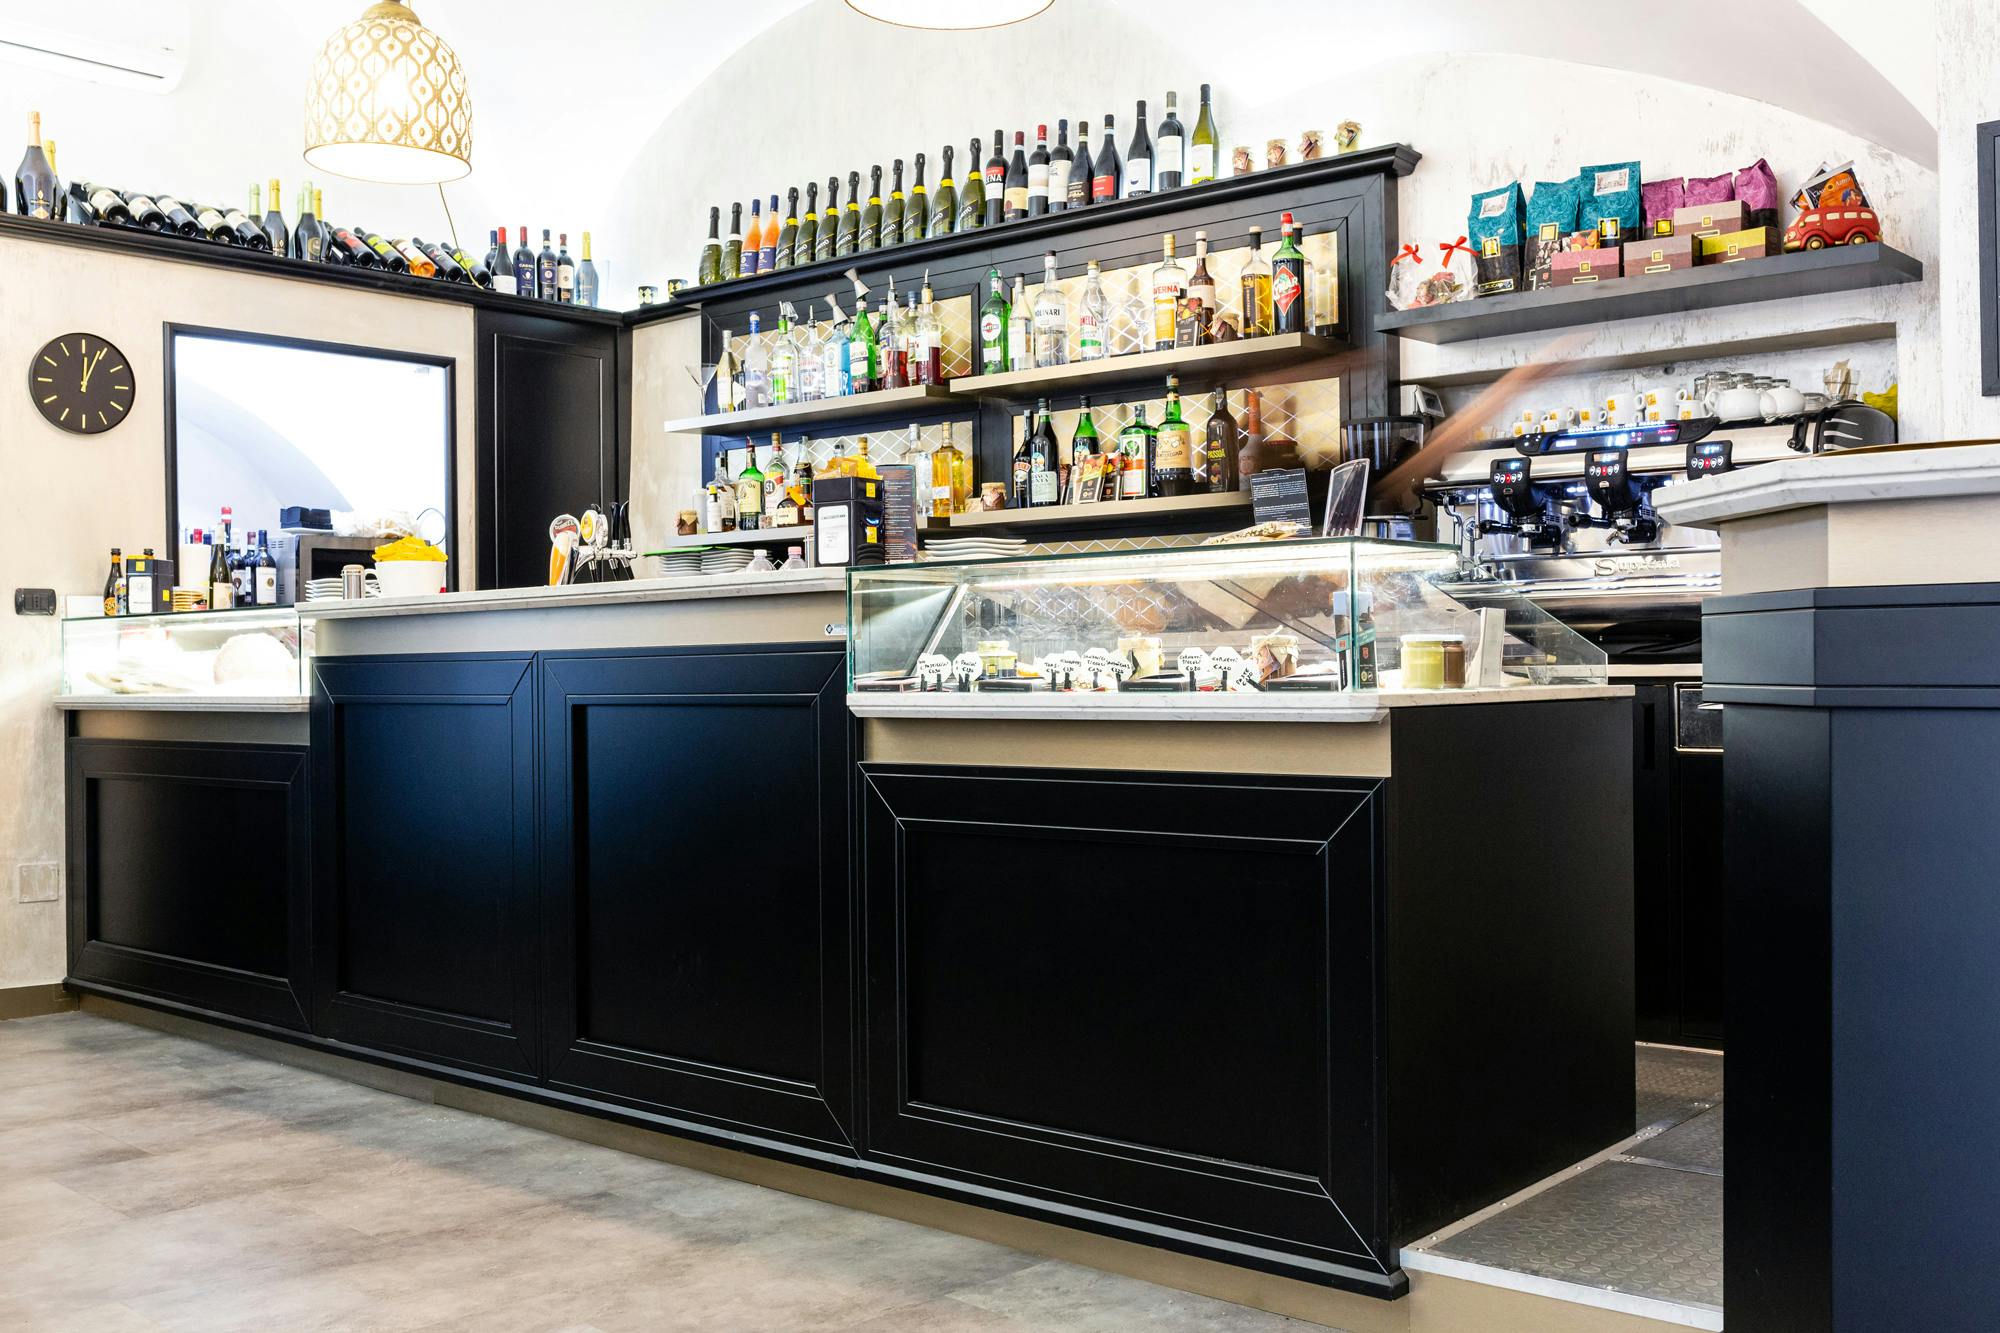 Numéro d'image 47 de la section actuelle de A century old building gets a new lease of life as one of Oslo’s most vibrant hotels thanks to Silestone de Cosentino Canada